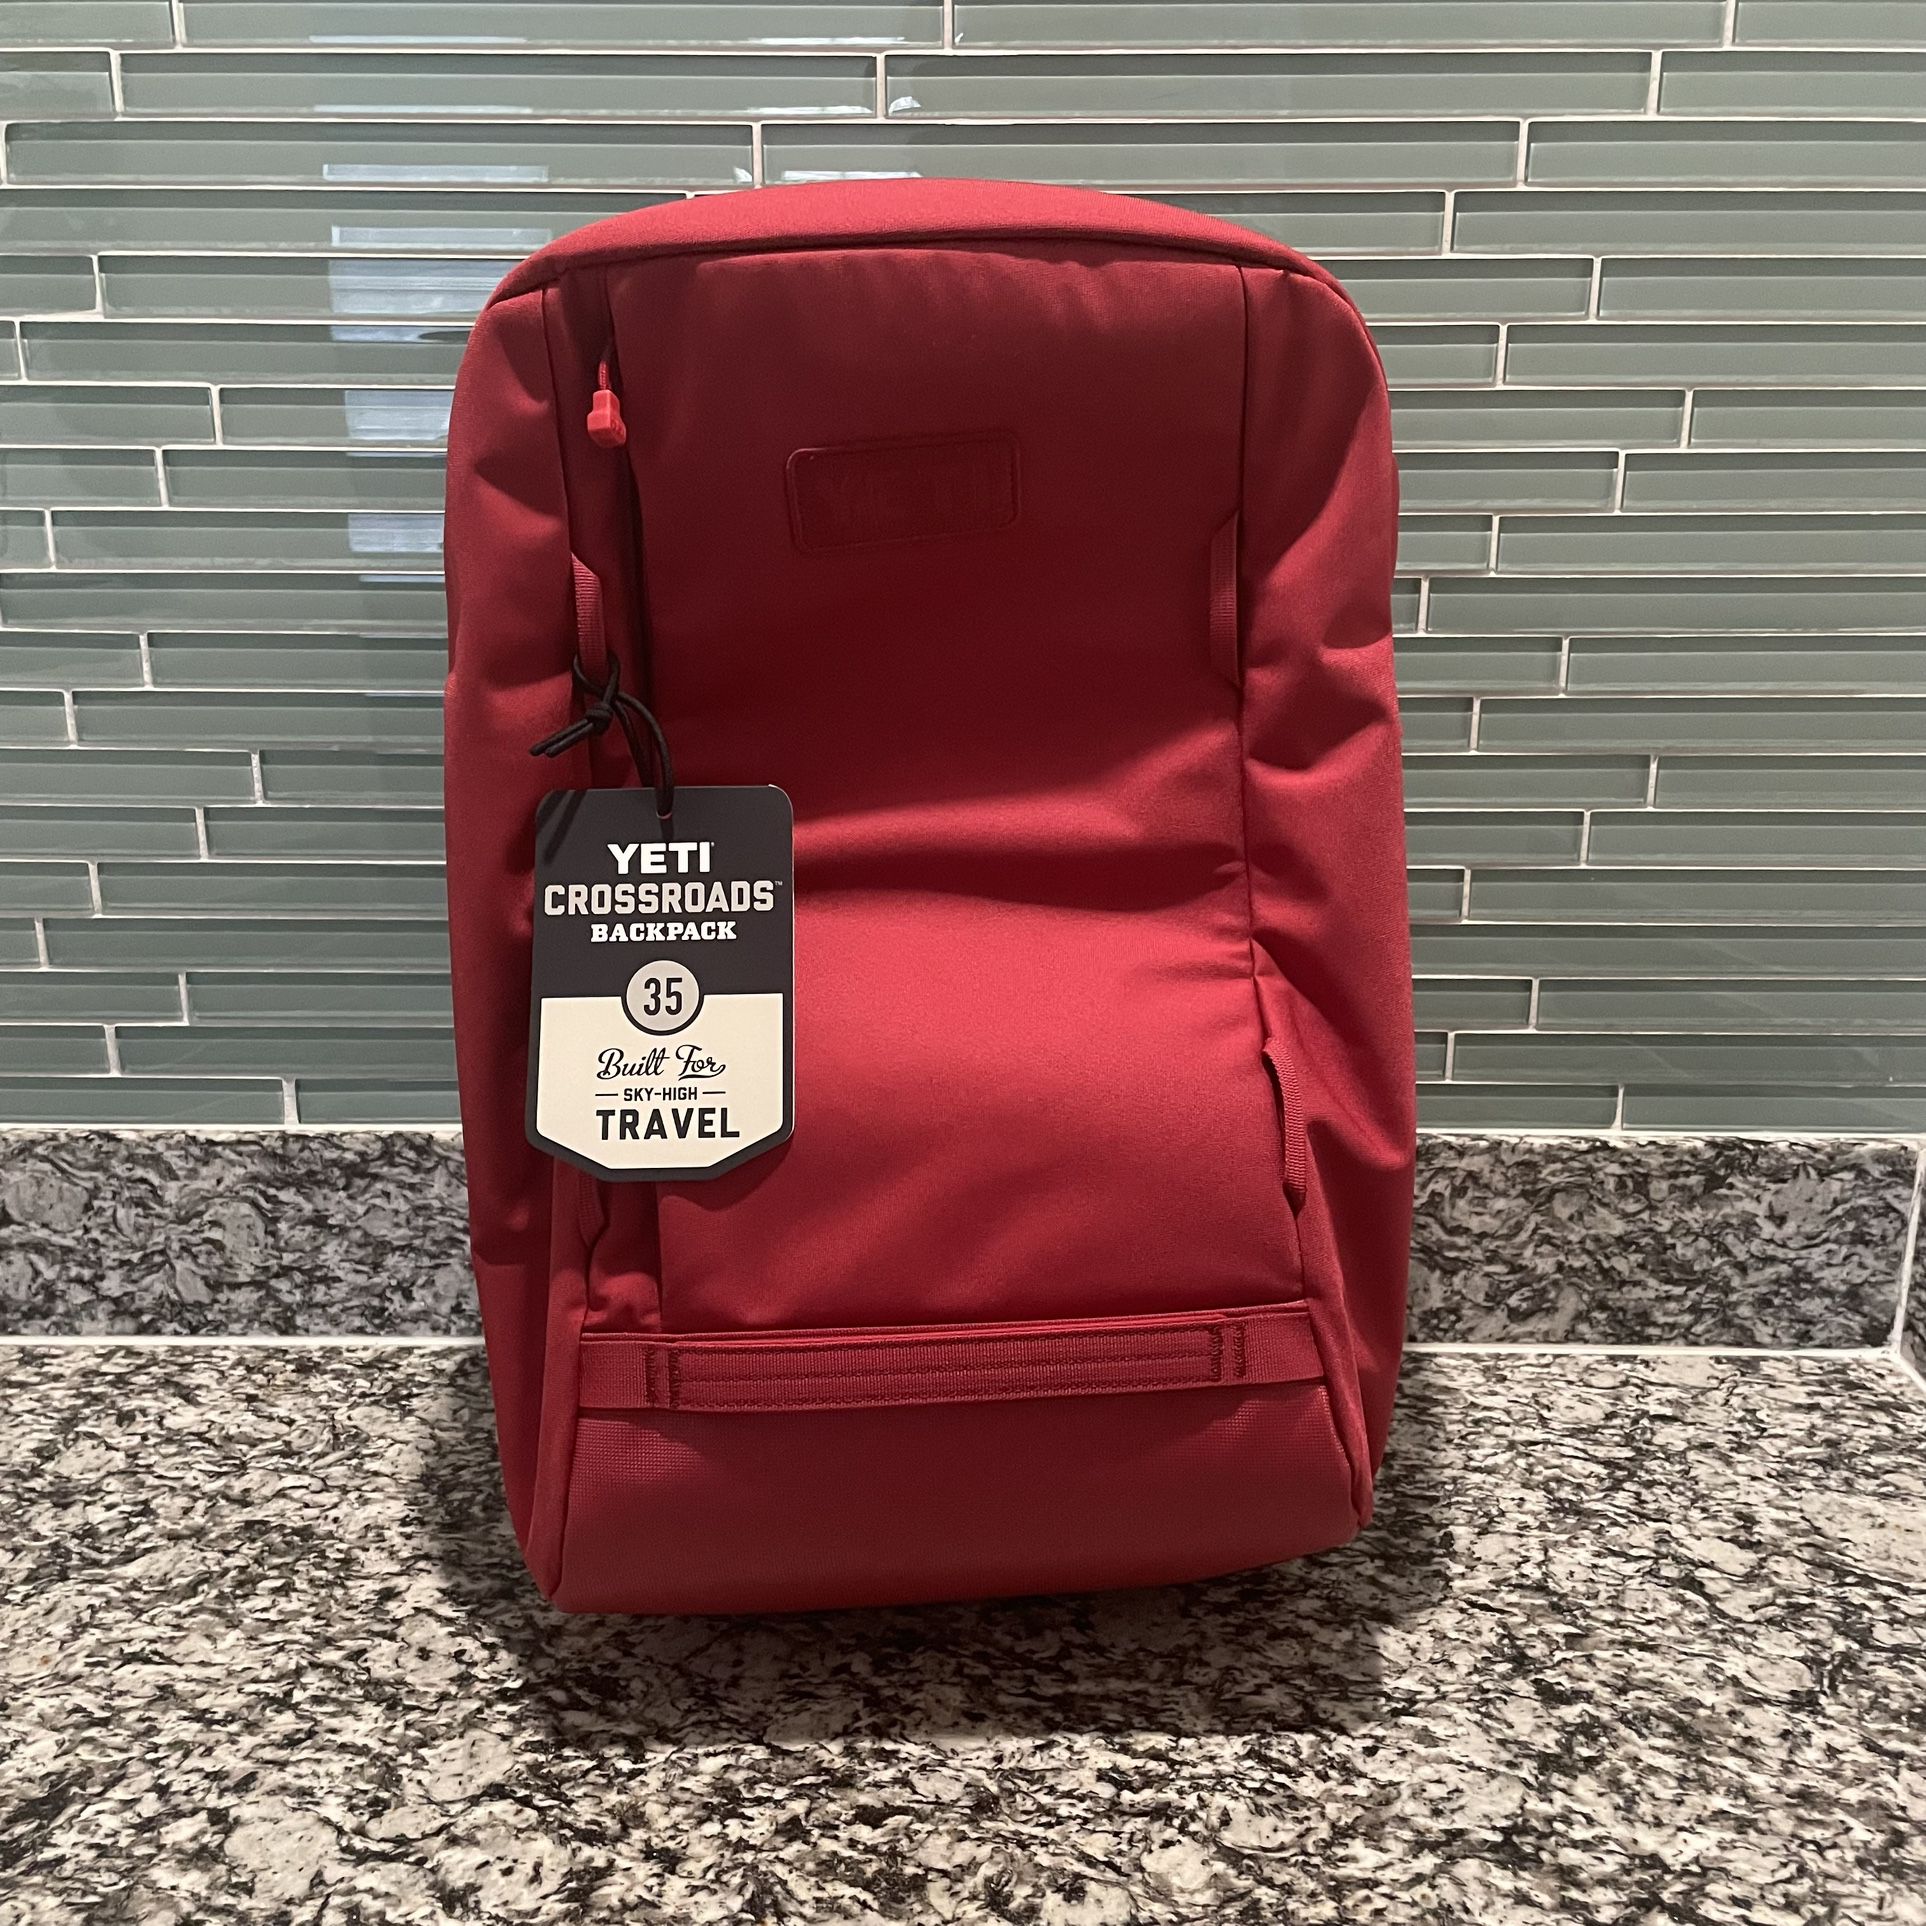 YETI Crossroads 35L Harvest Red Travel Backpack | Brand New W/ Tags